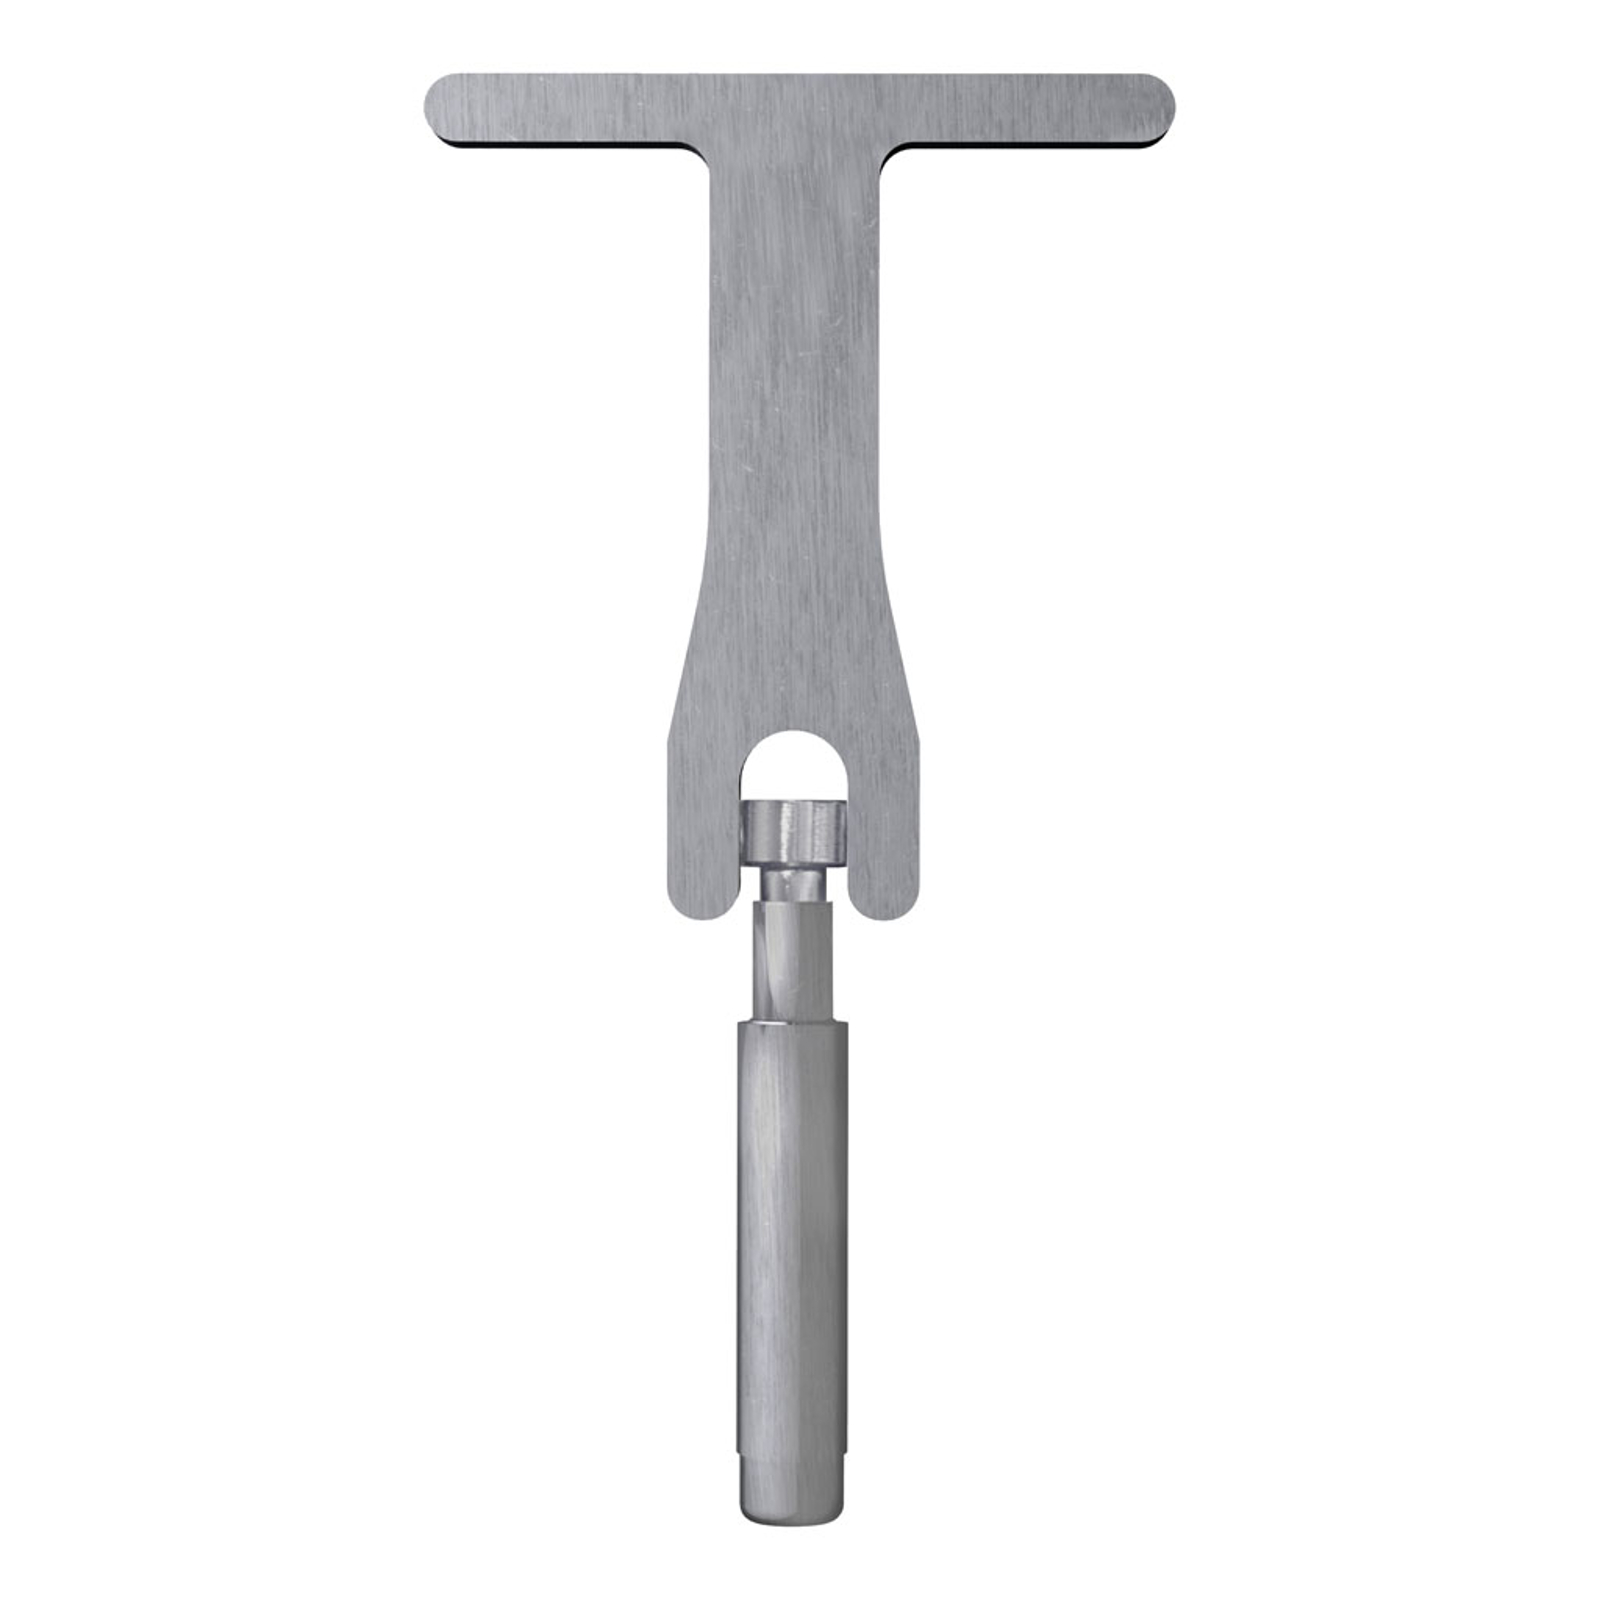 Folding Ball T-Handle Replacement w/Cotter Pin